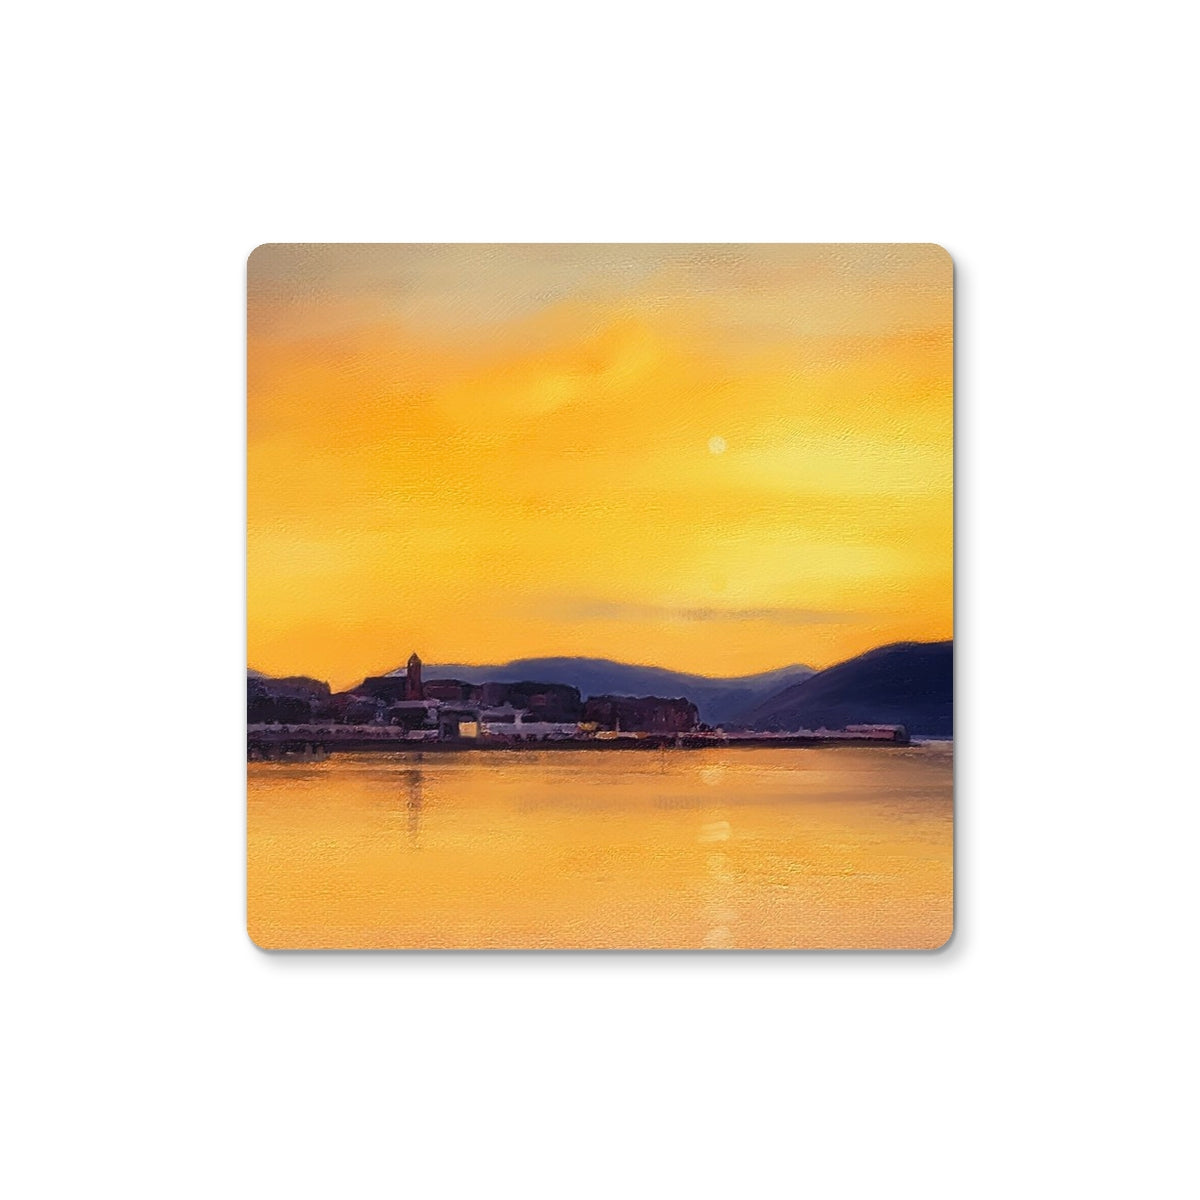 Gourock From Cardwell Bay Art Gifts Coaster-Coasters-River Clyde Art Gallery-Single Coaster-Paintings, Prints, Homeware, Art Gifts From Scotland By Scottish Artist Kevin Hunter